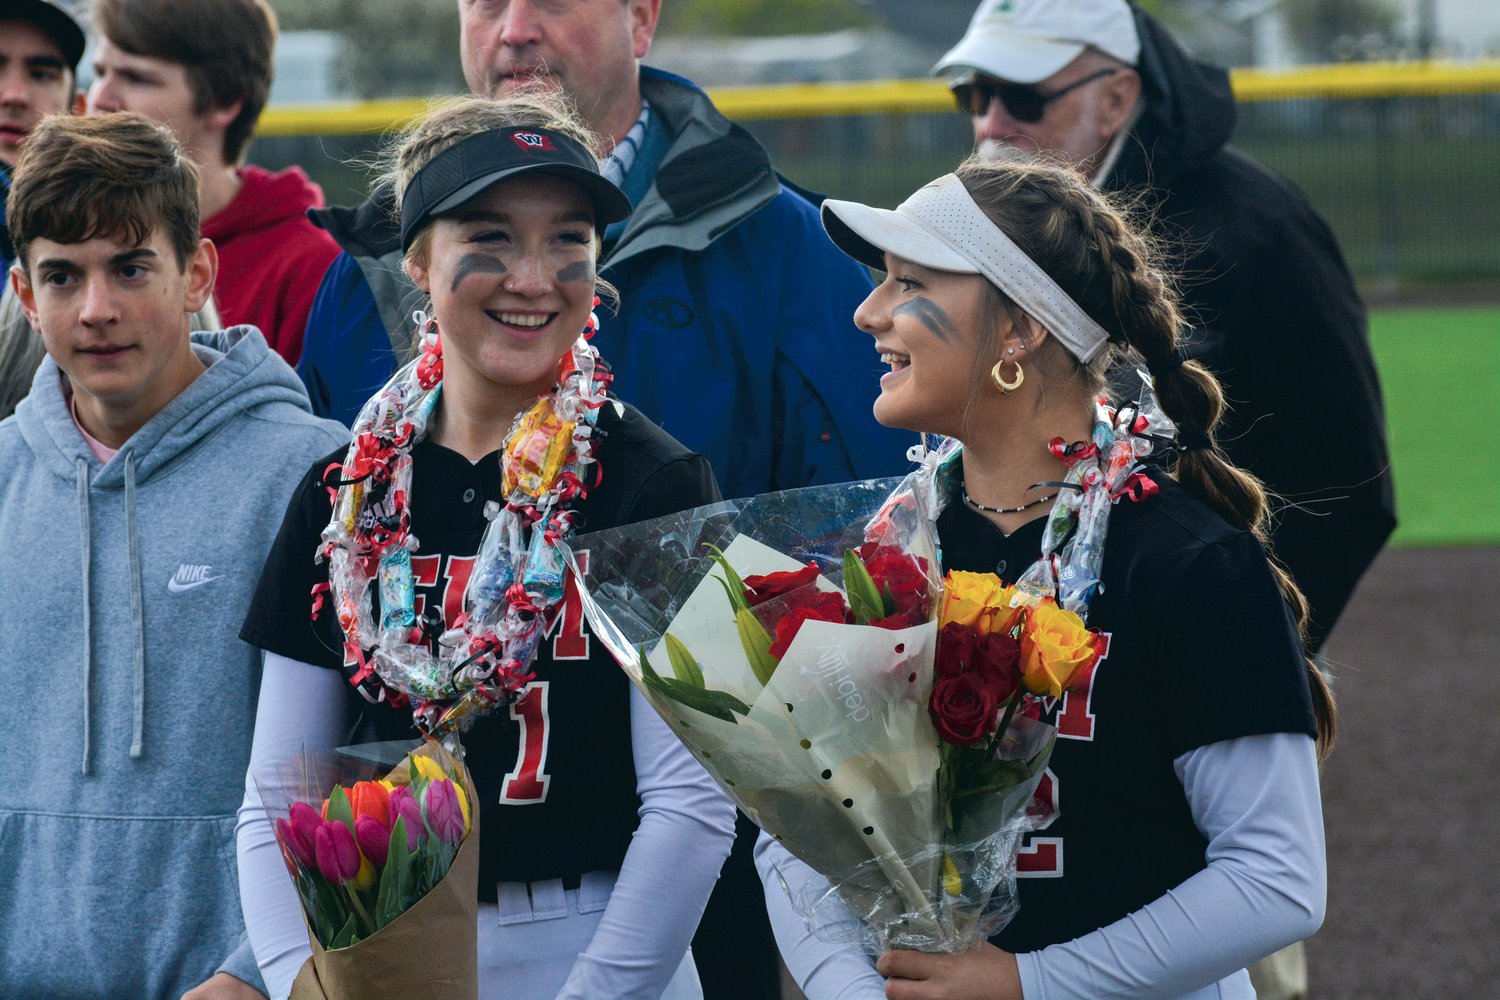 Seniors Molly Embrey (left) and Elena Castanon (right) smile after they received flowers on senior night on May 9 following a game against Capital High School.